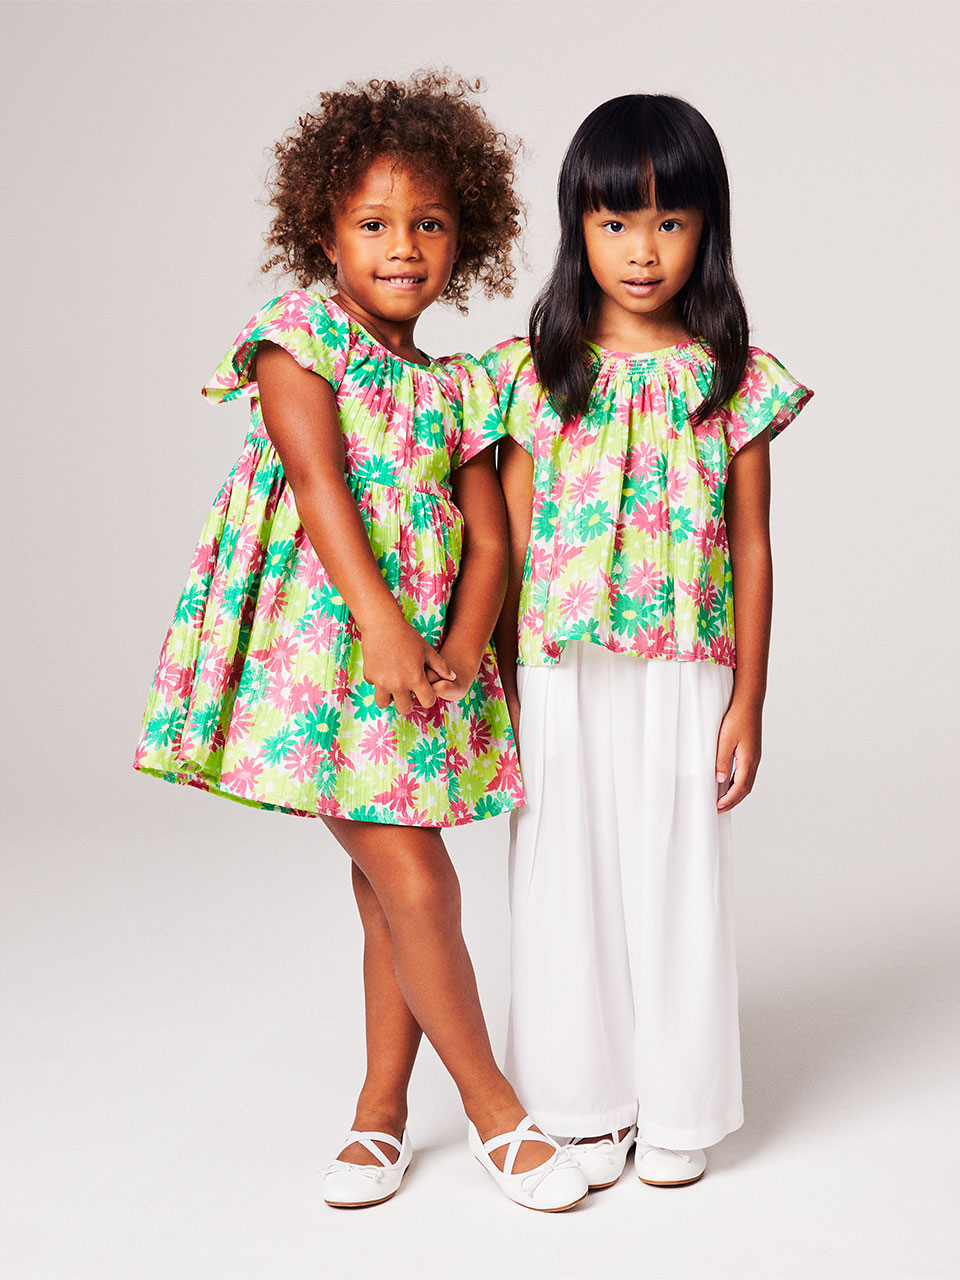 Kid Girls' Apparel New Collection 2023 | Benetton